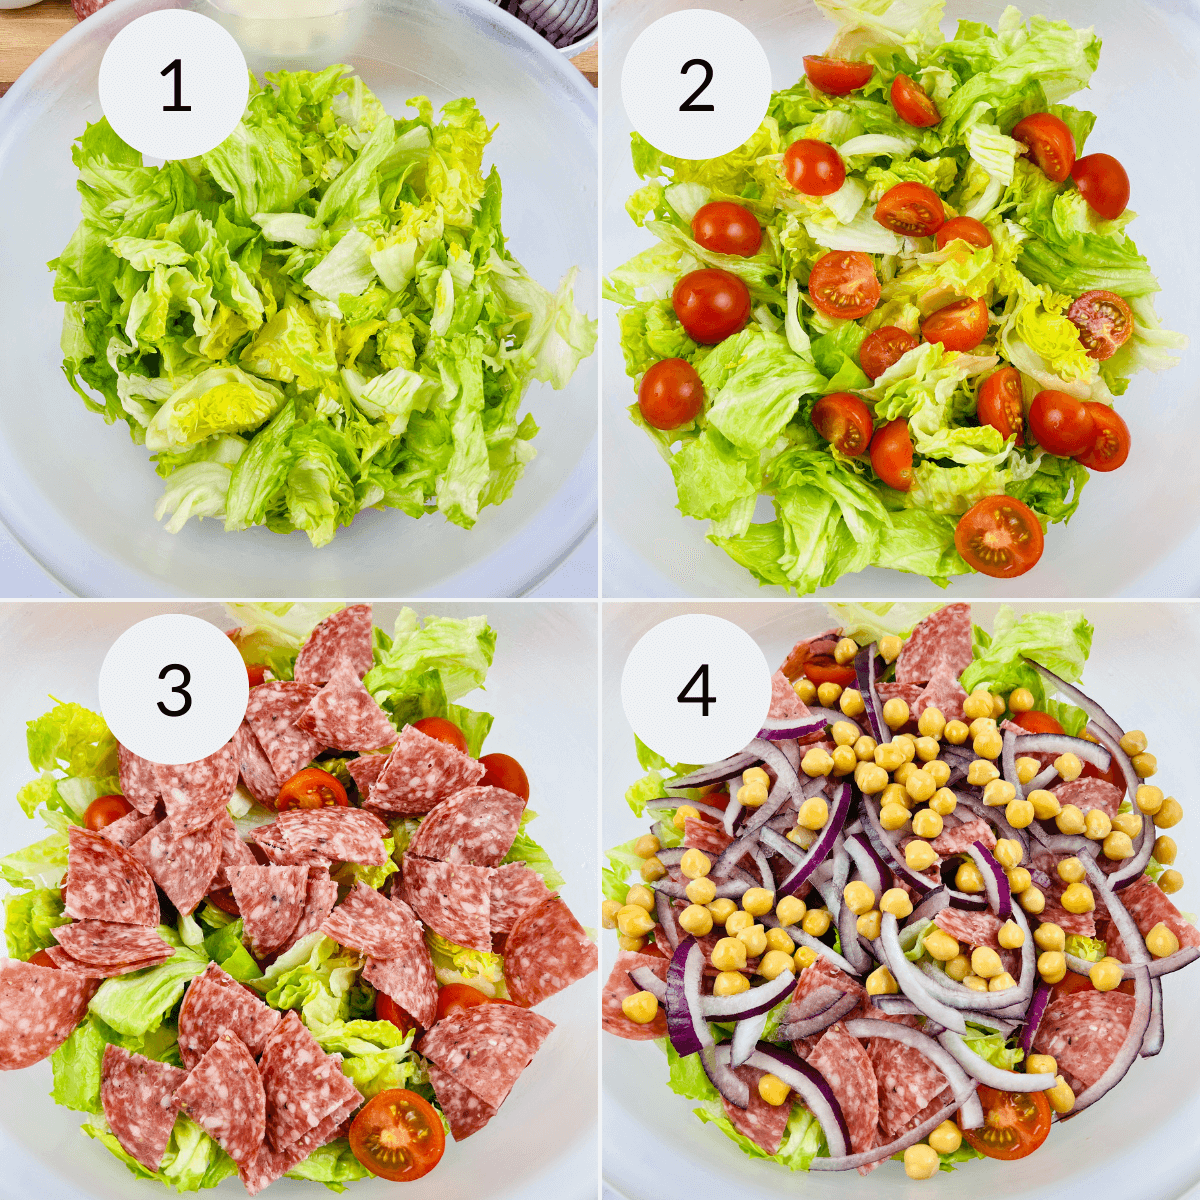 Four pictures illustrating the preparation of an Italian Chopped Salad with meat, tomatoes, and chickpeas.